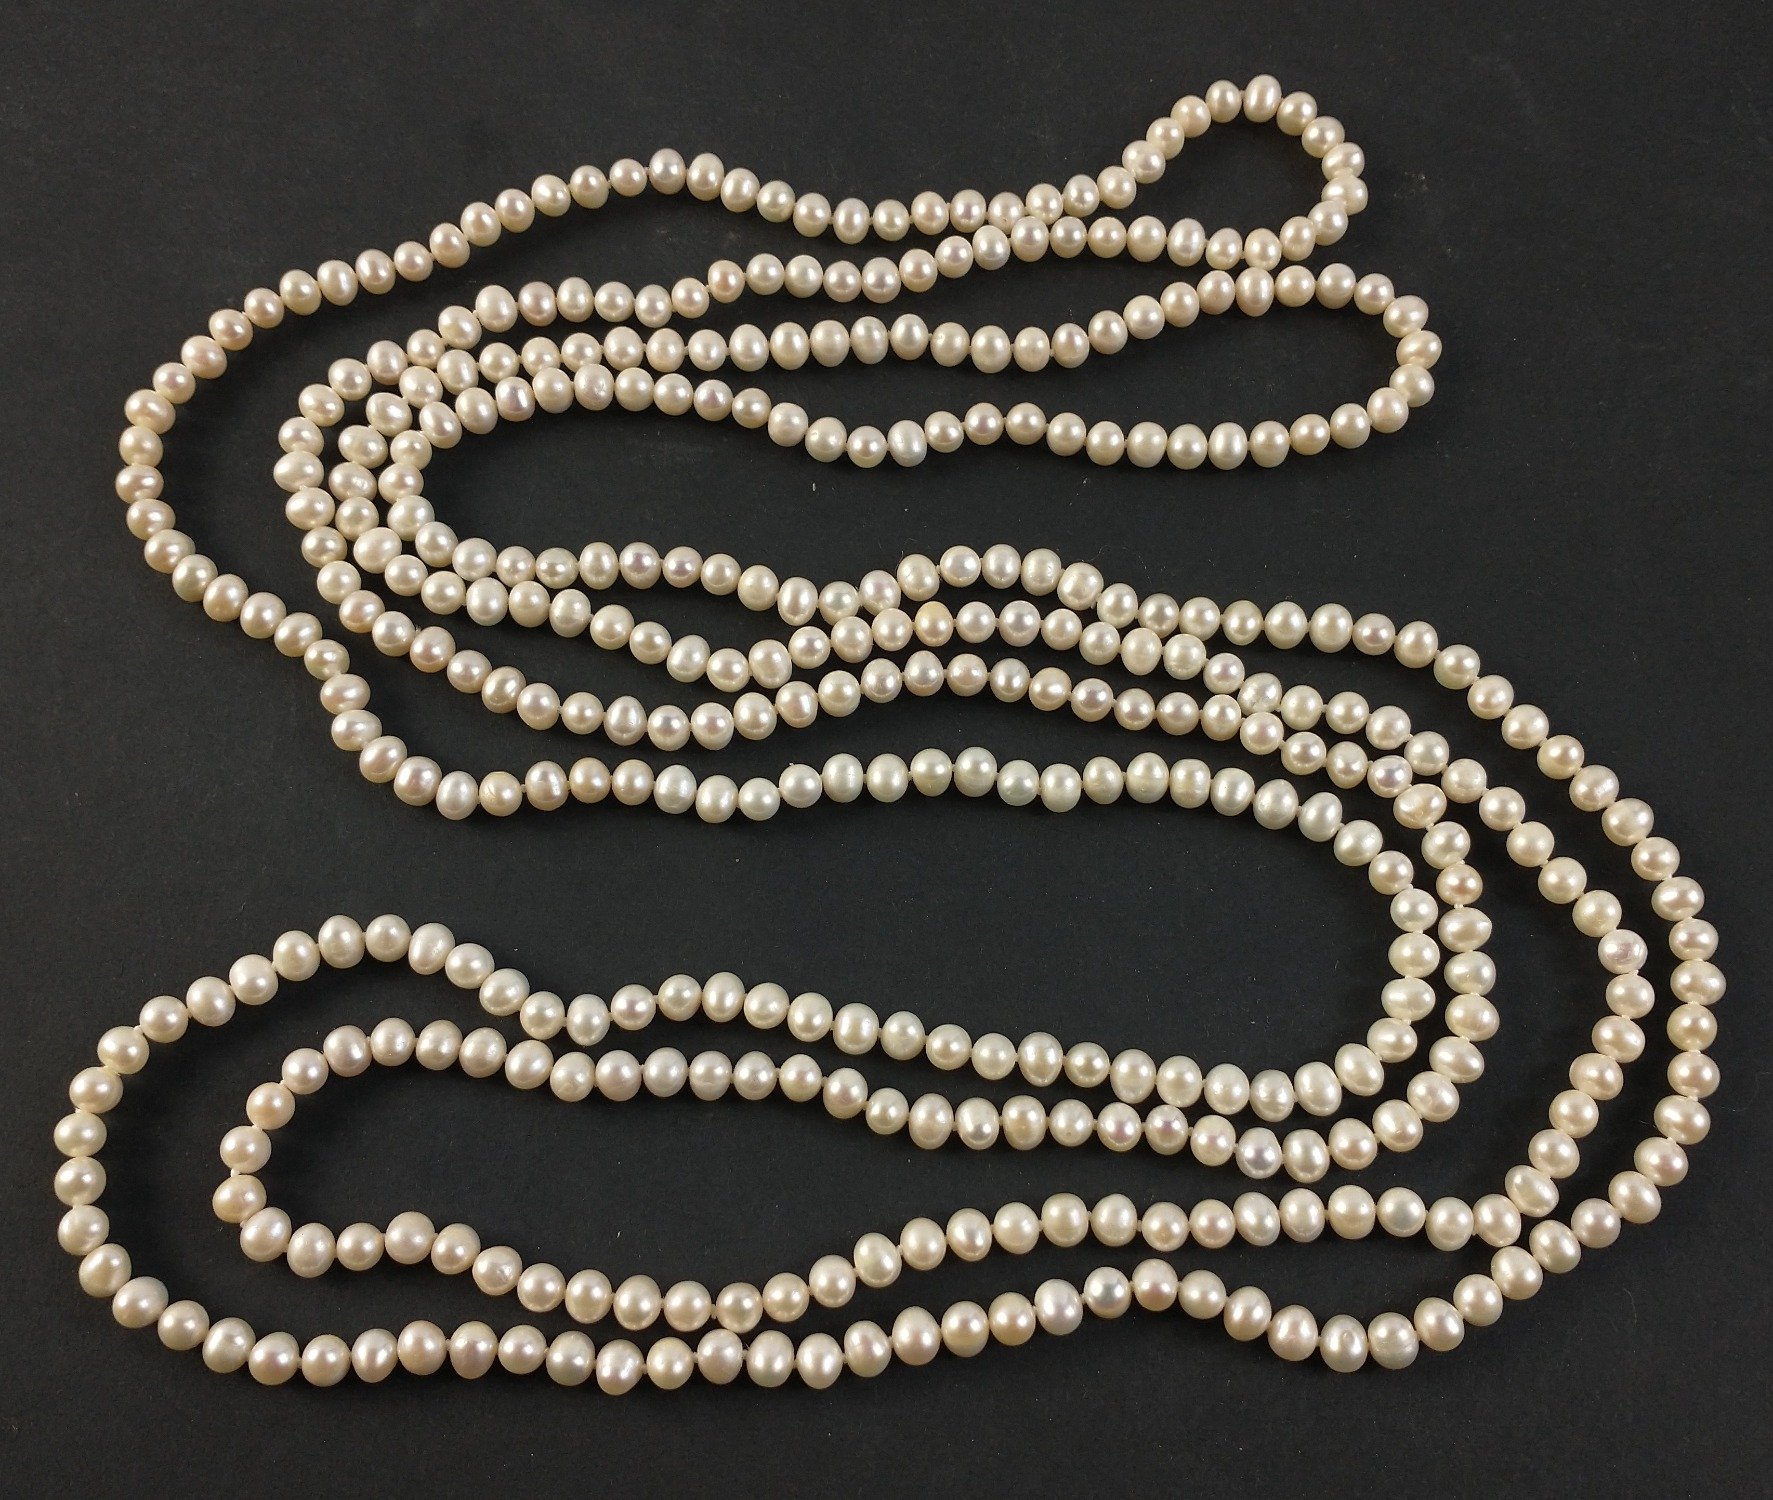 A string of fresh water pearls approx 250cm long